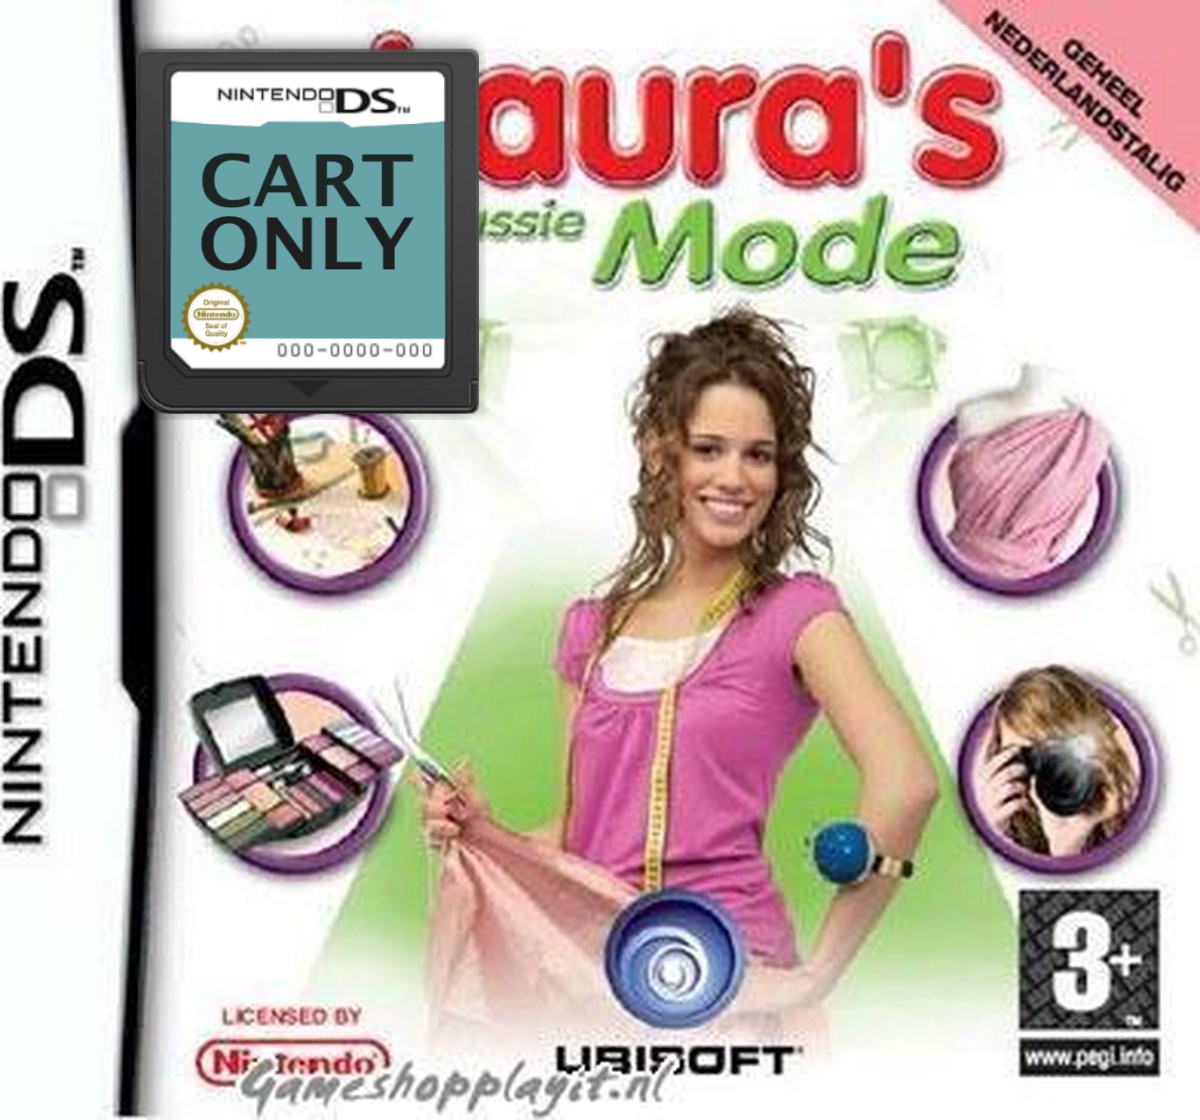 Laura's Passie Mode - Cart Only - Nintendo DS Games